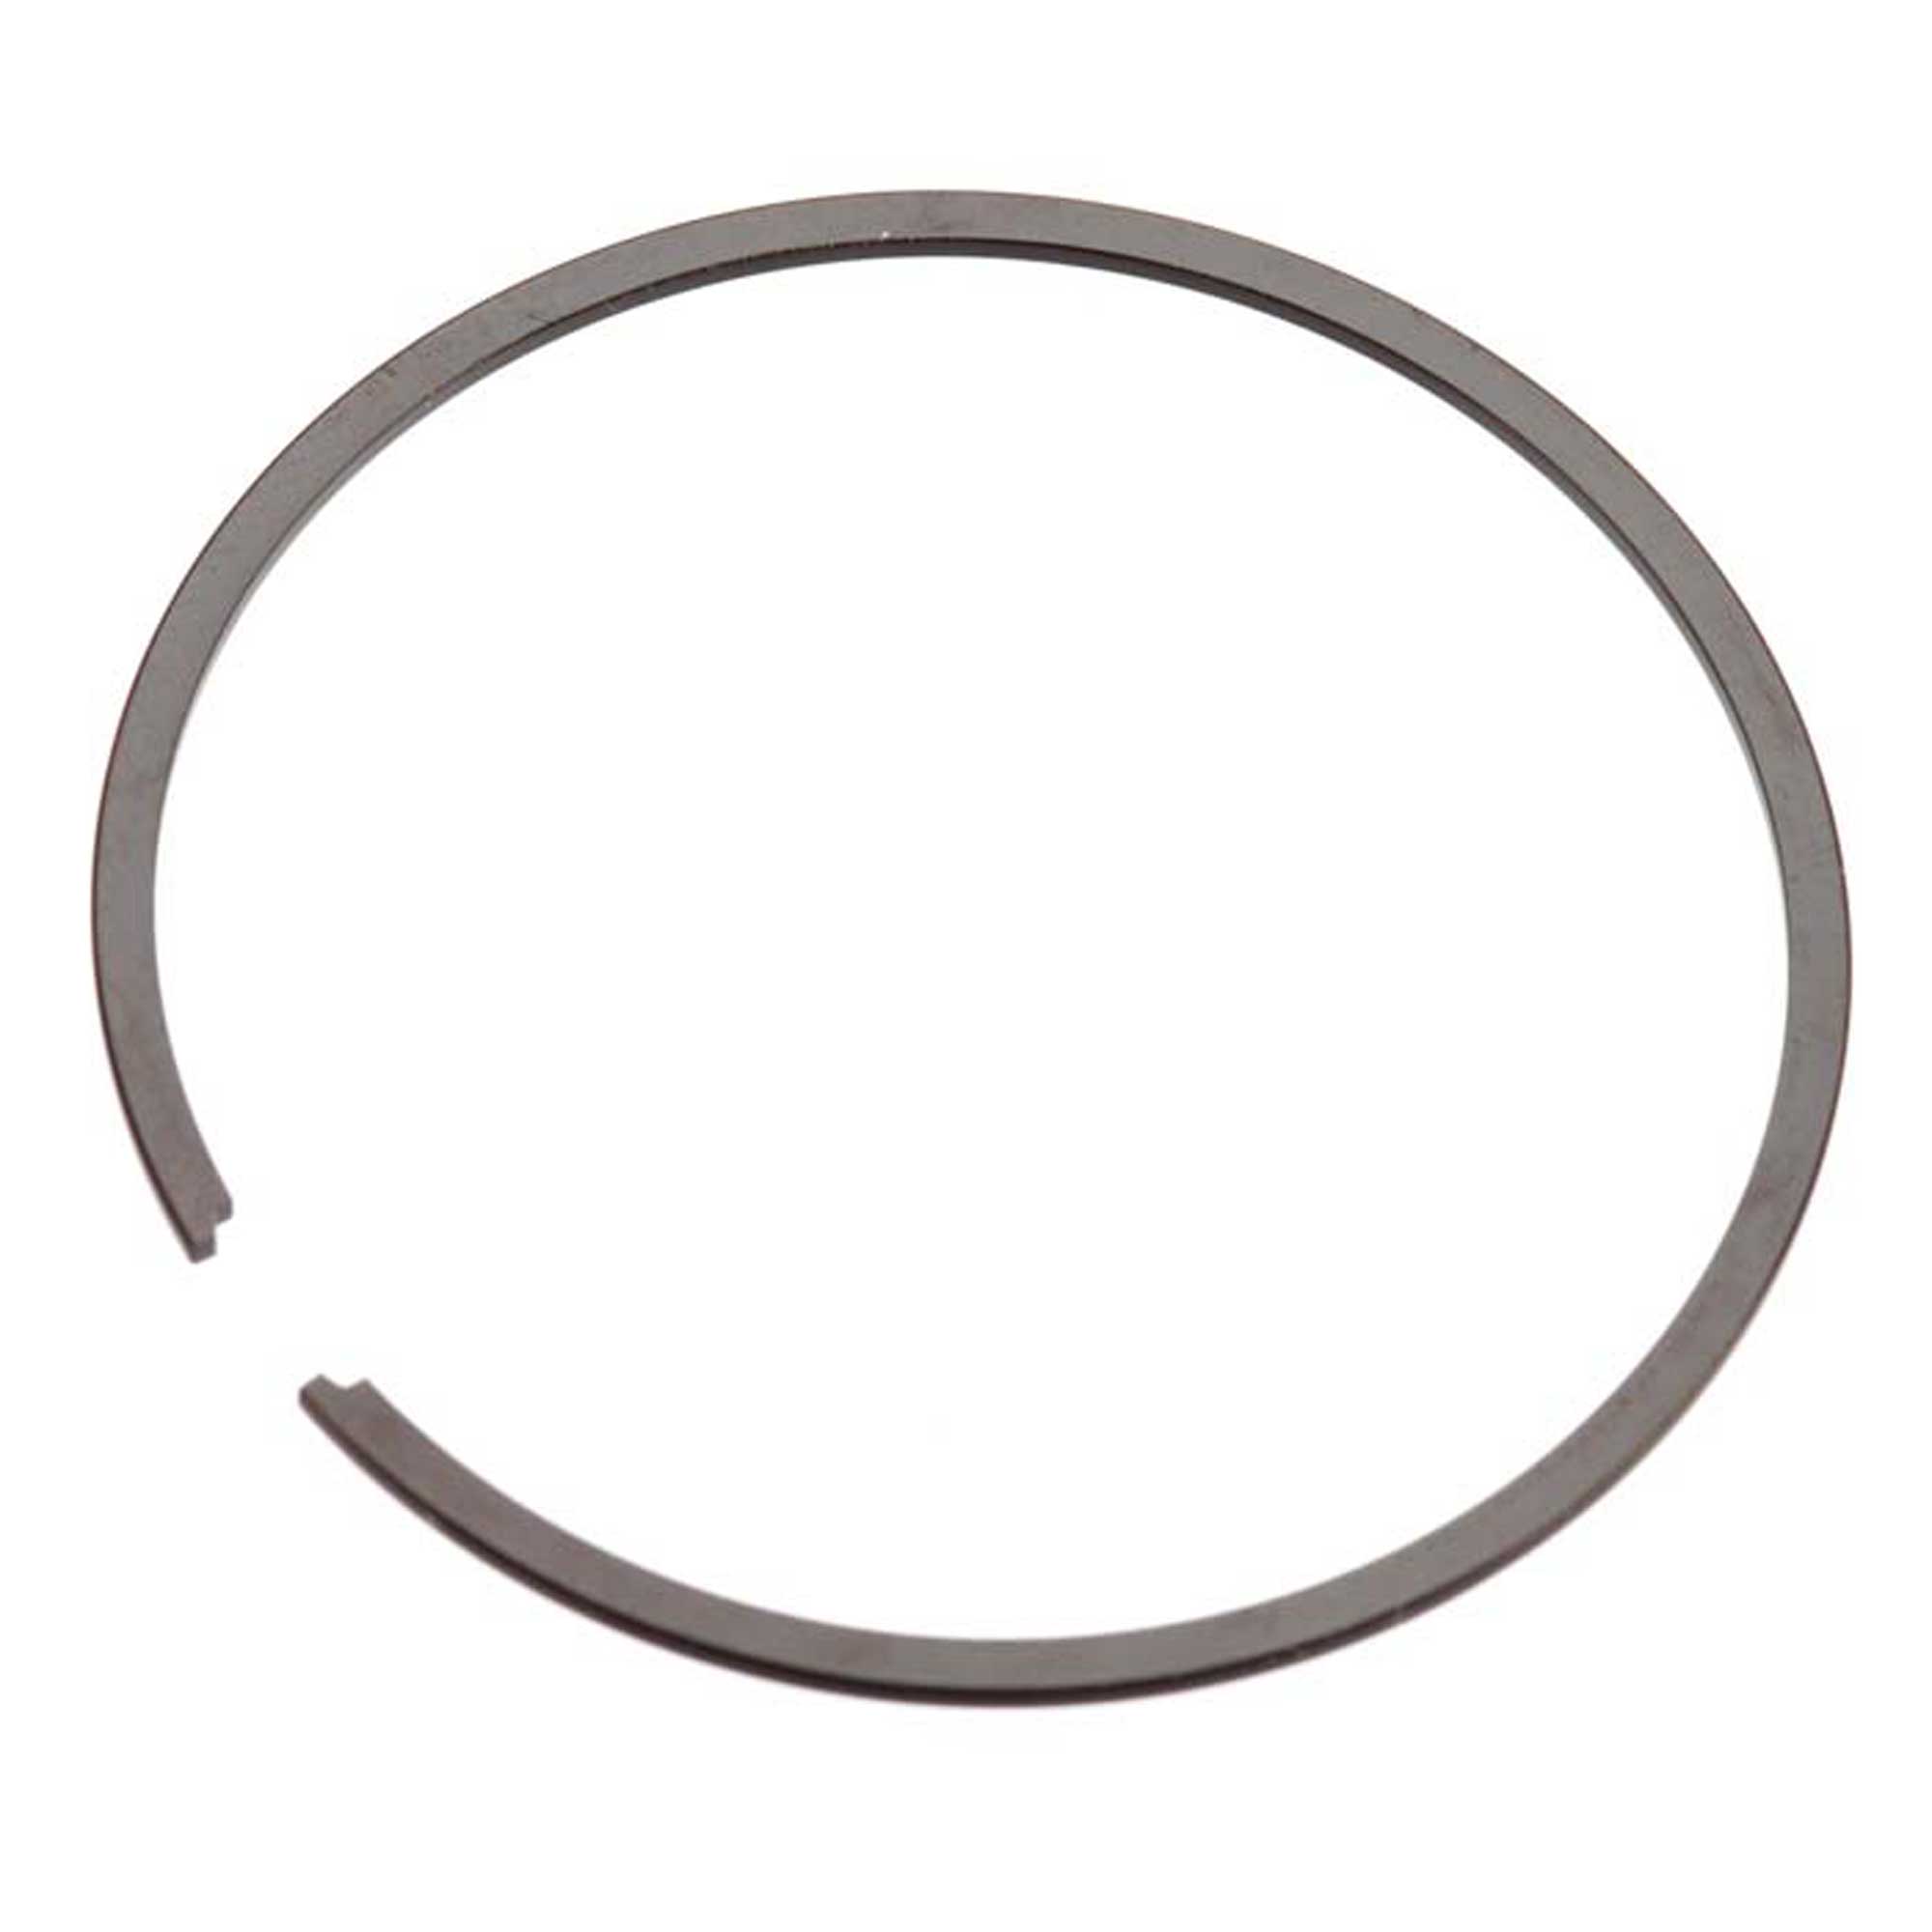 Engines 28603400 Piston Ring GT60 Vehicle Part Hobbico Inc OSMG7845 O.S 